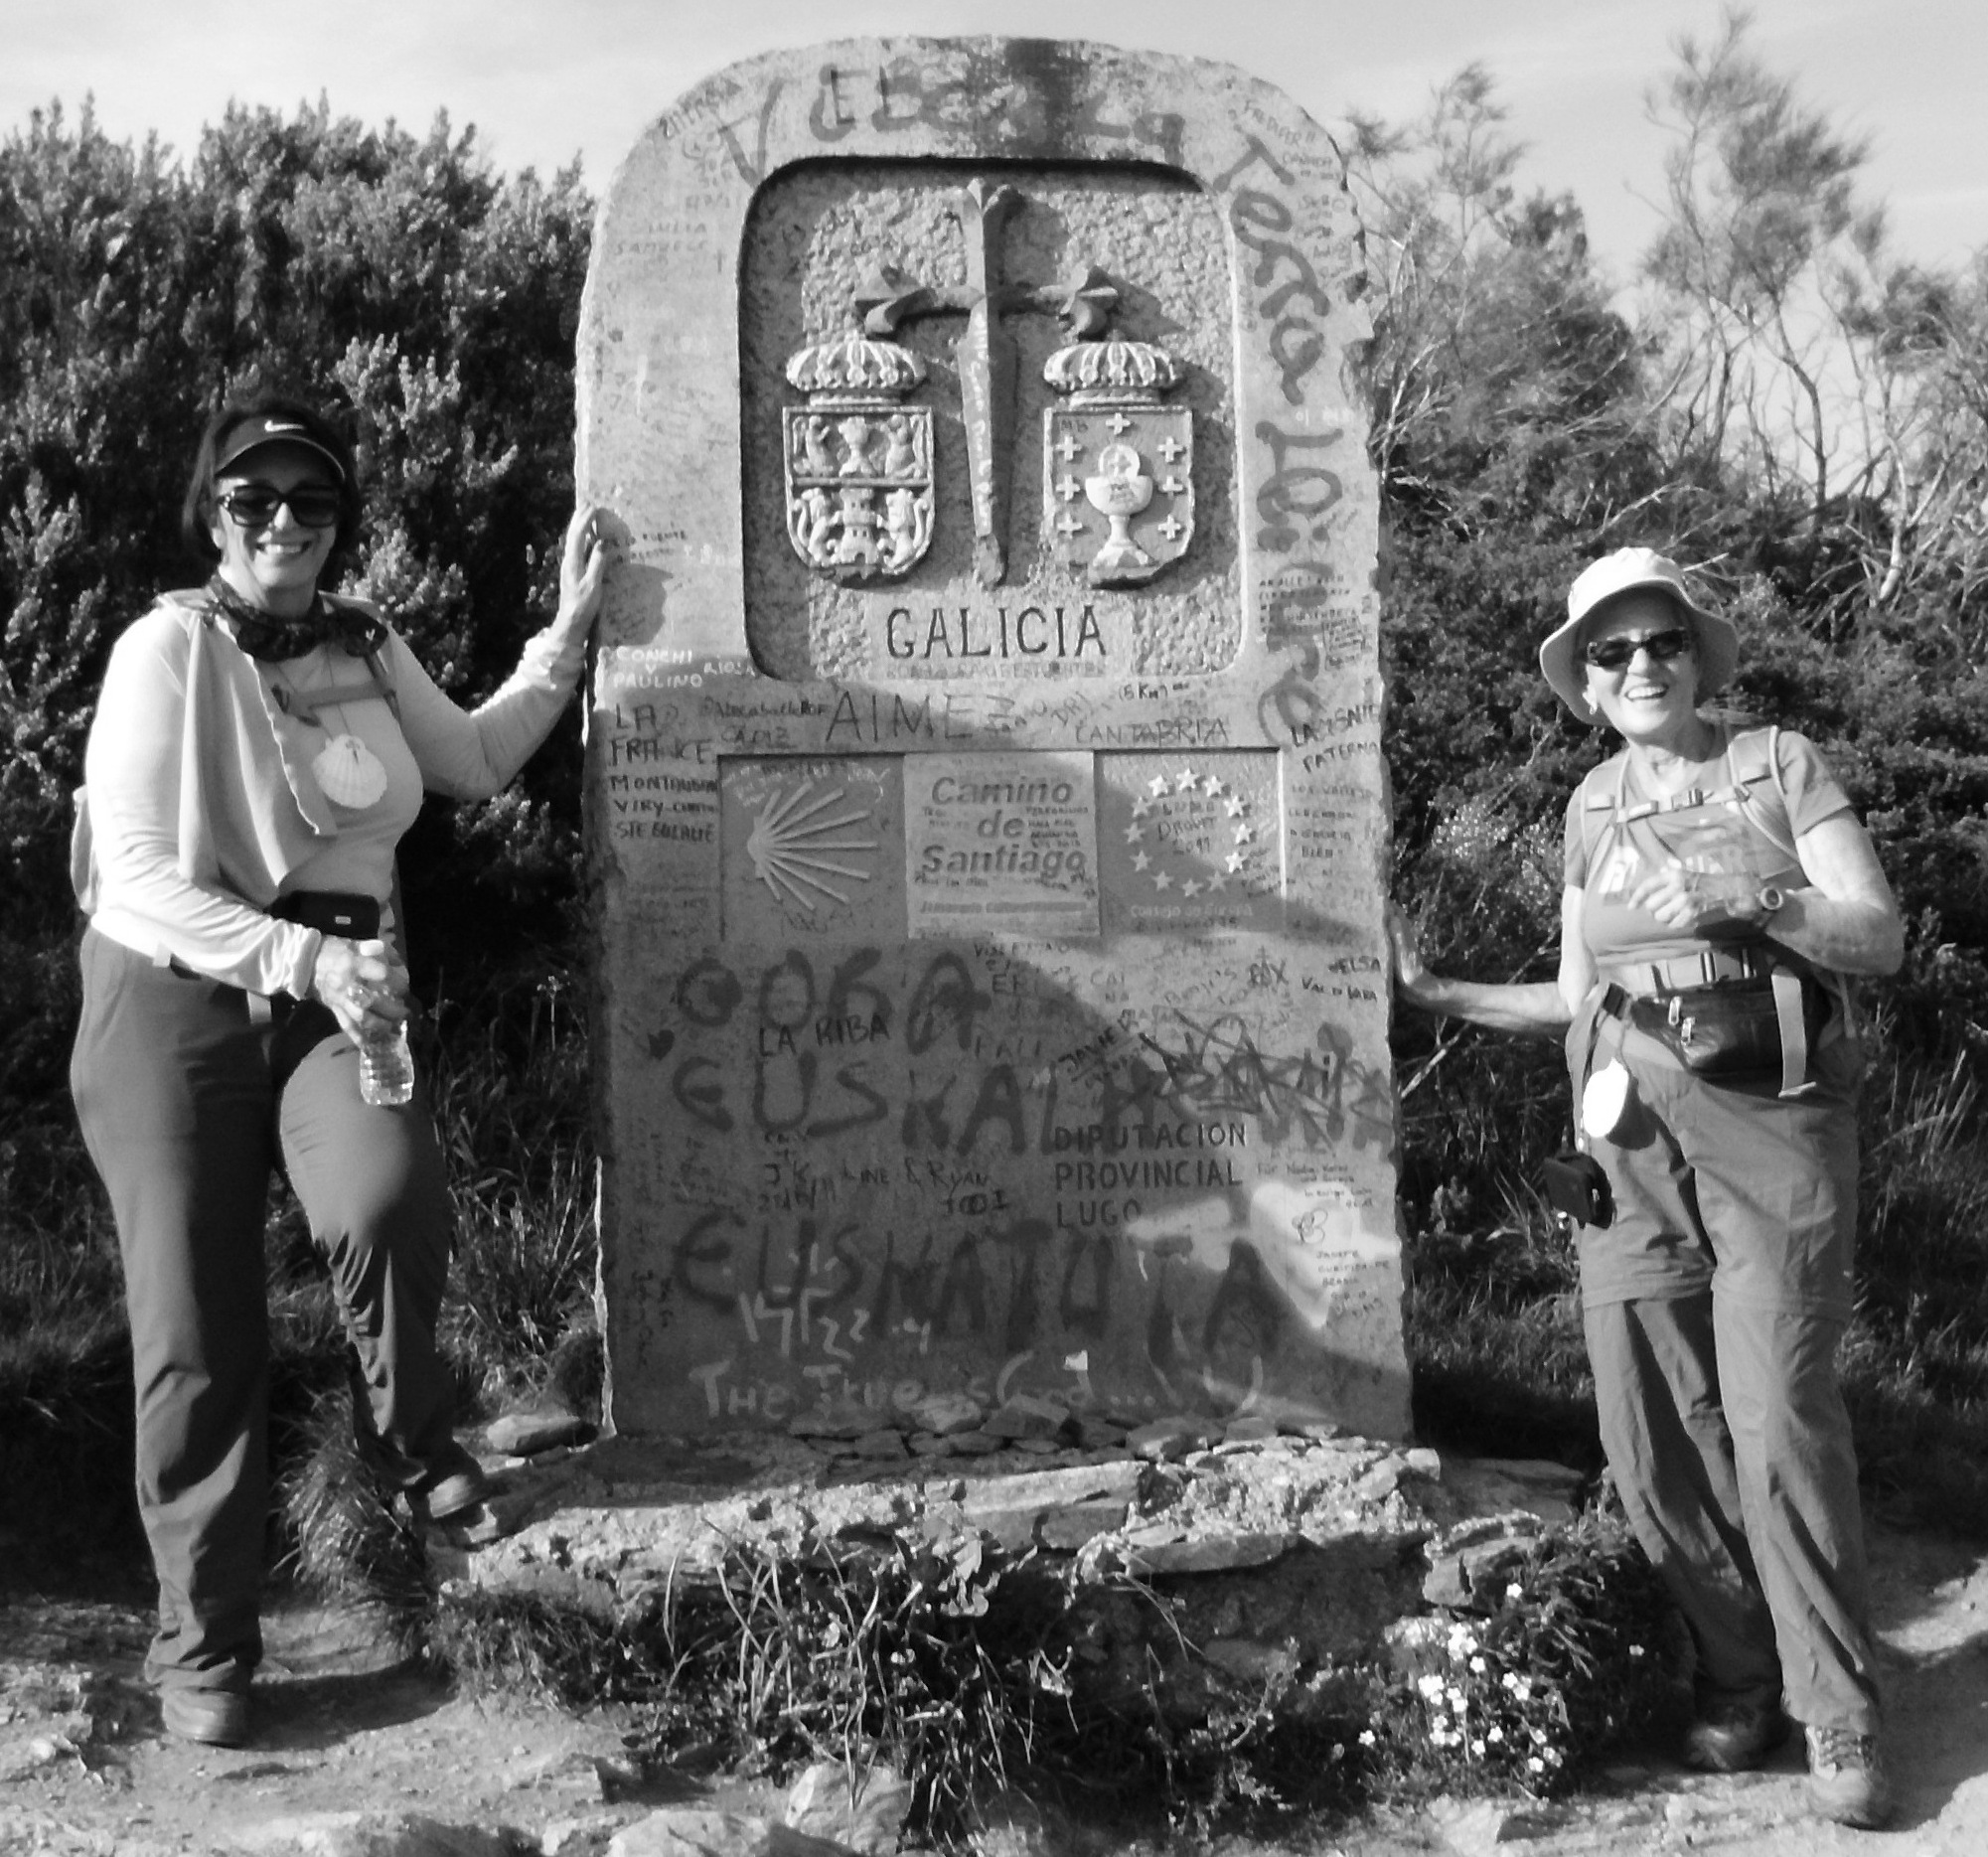 BENICIA POET LAUREATE Lois Requist (right) hiked 100 miles of The Way with her friend Juliet.